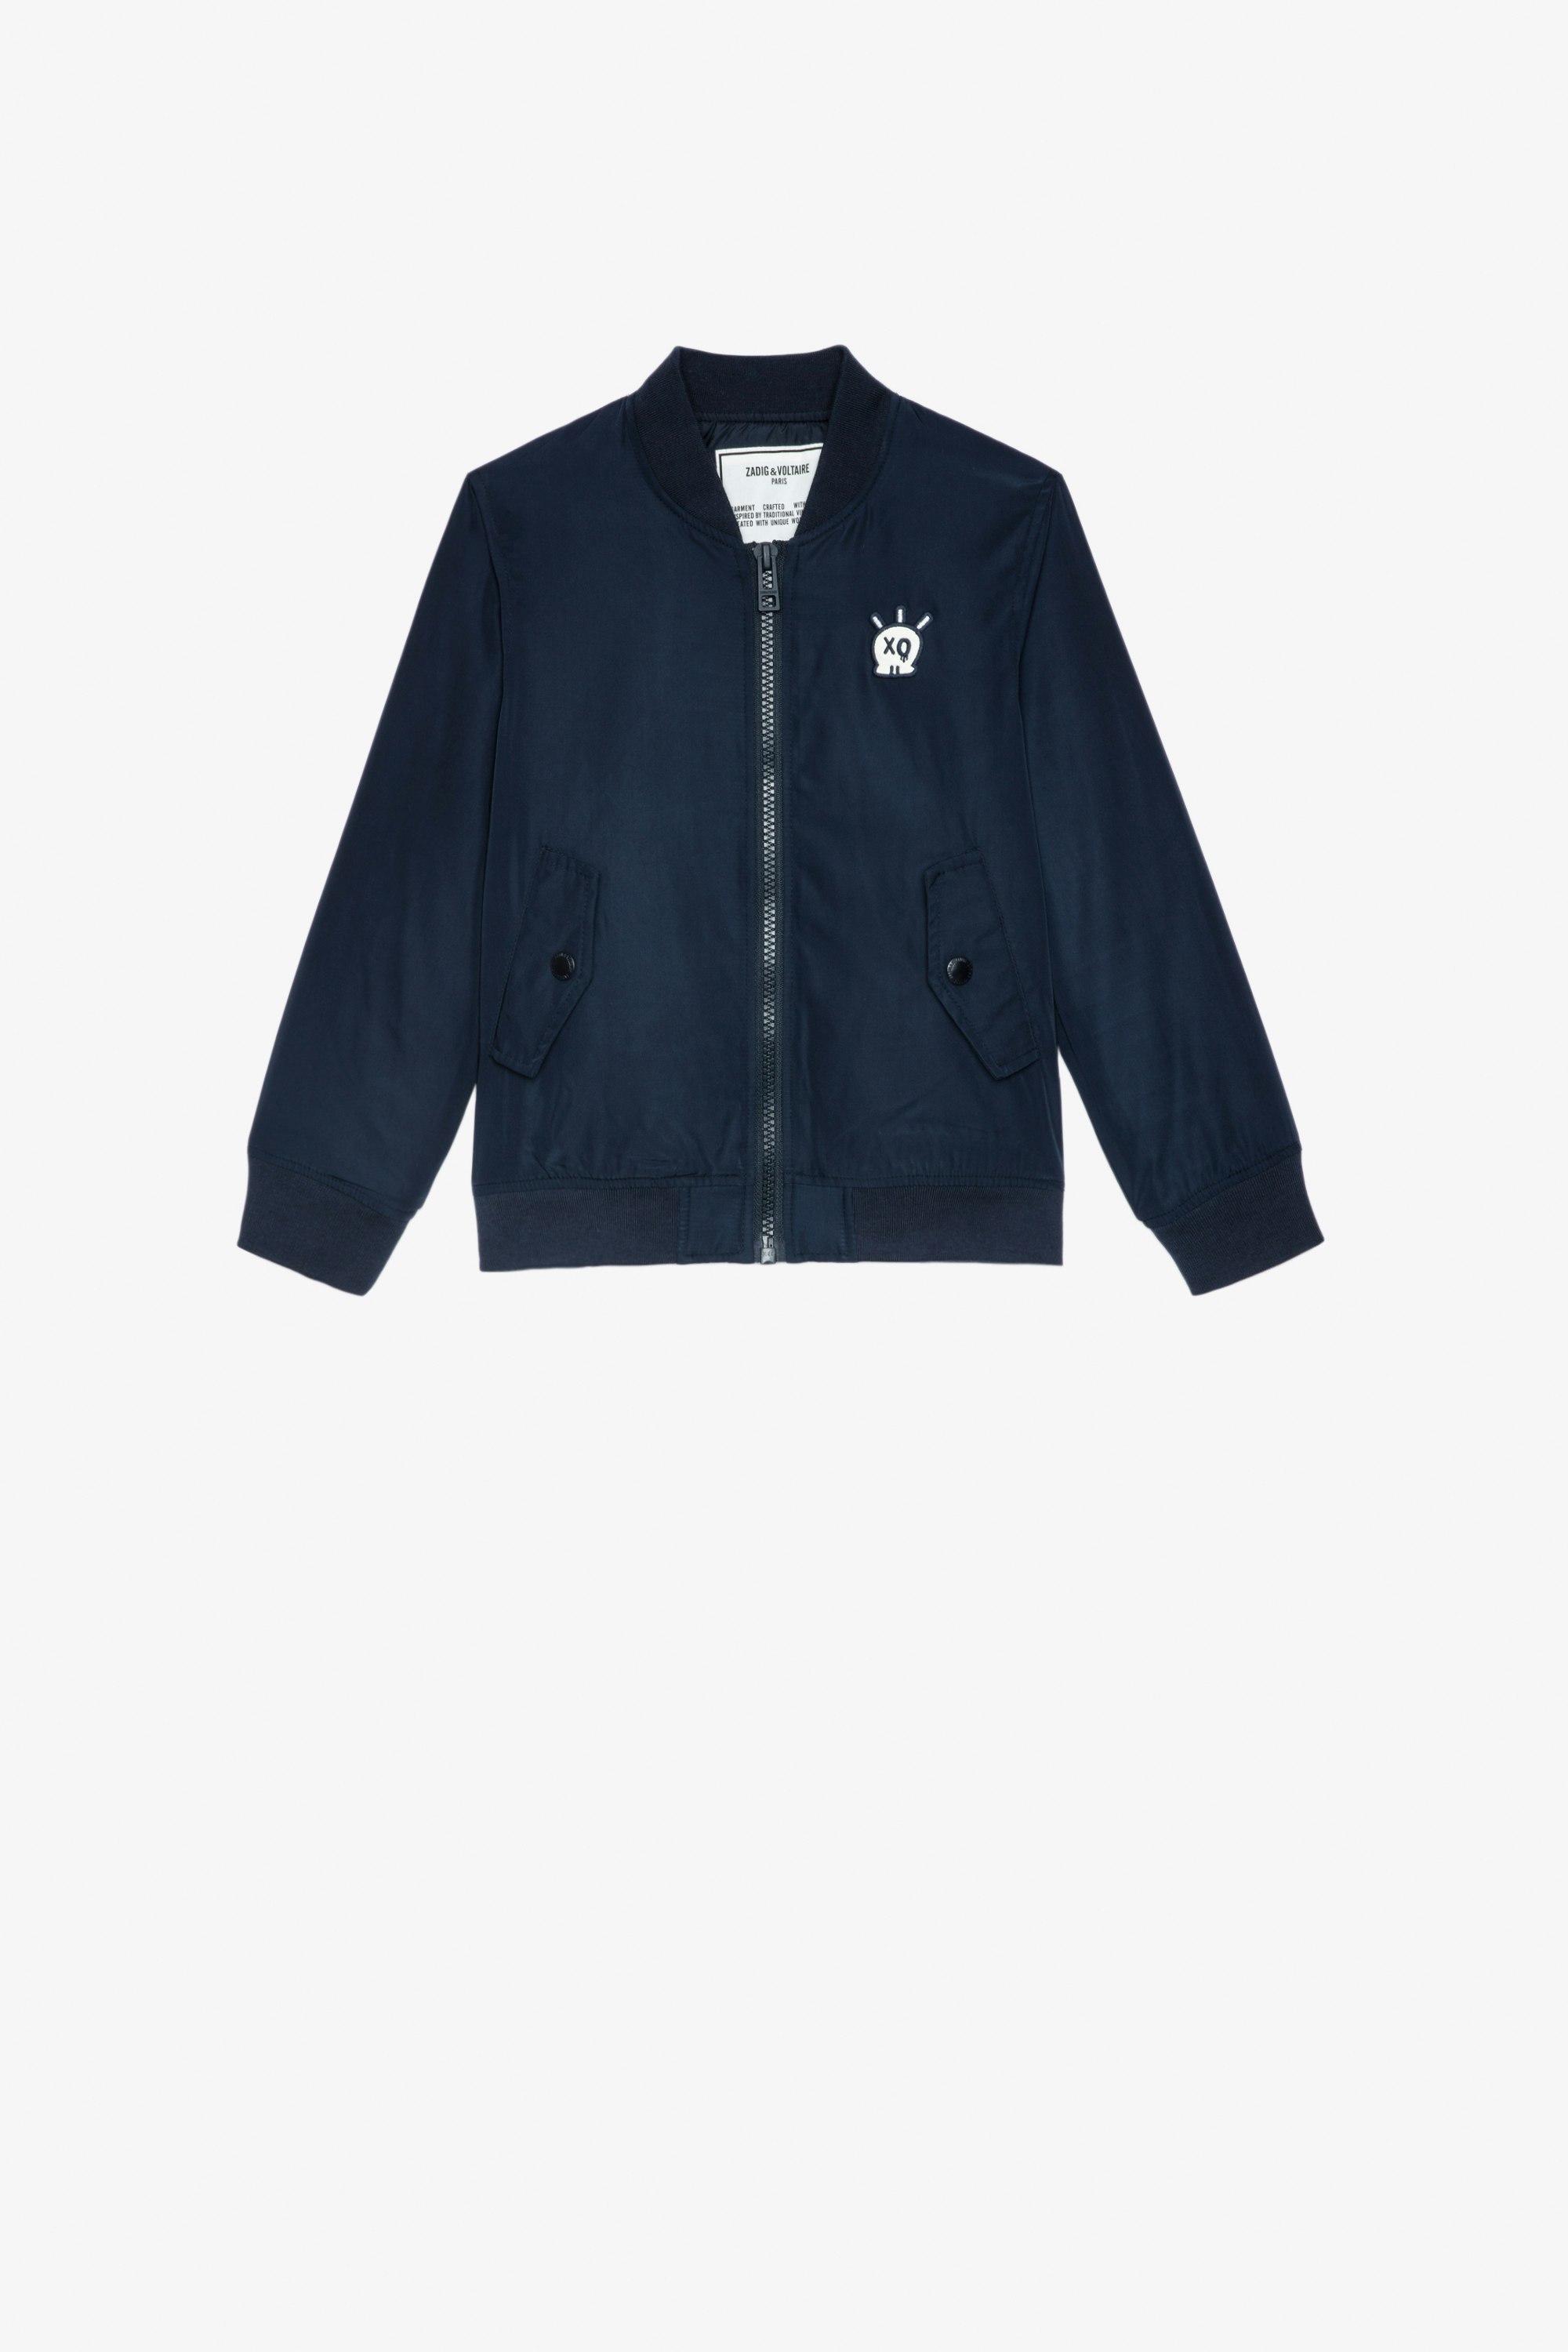 Kids' Benet Bomber Jacket Kids’ navy-blue water-repellent bomber jacket with an embroidered badge